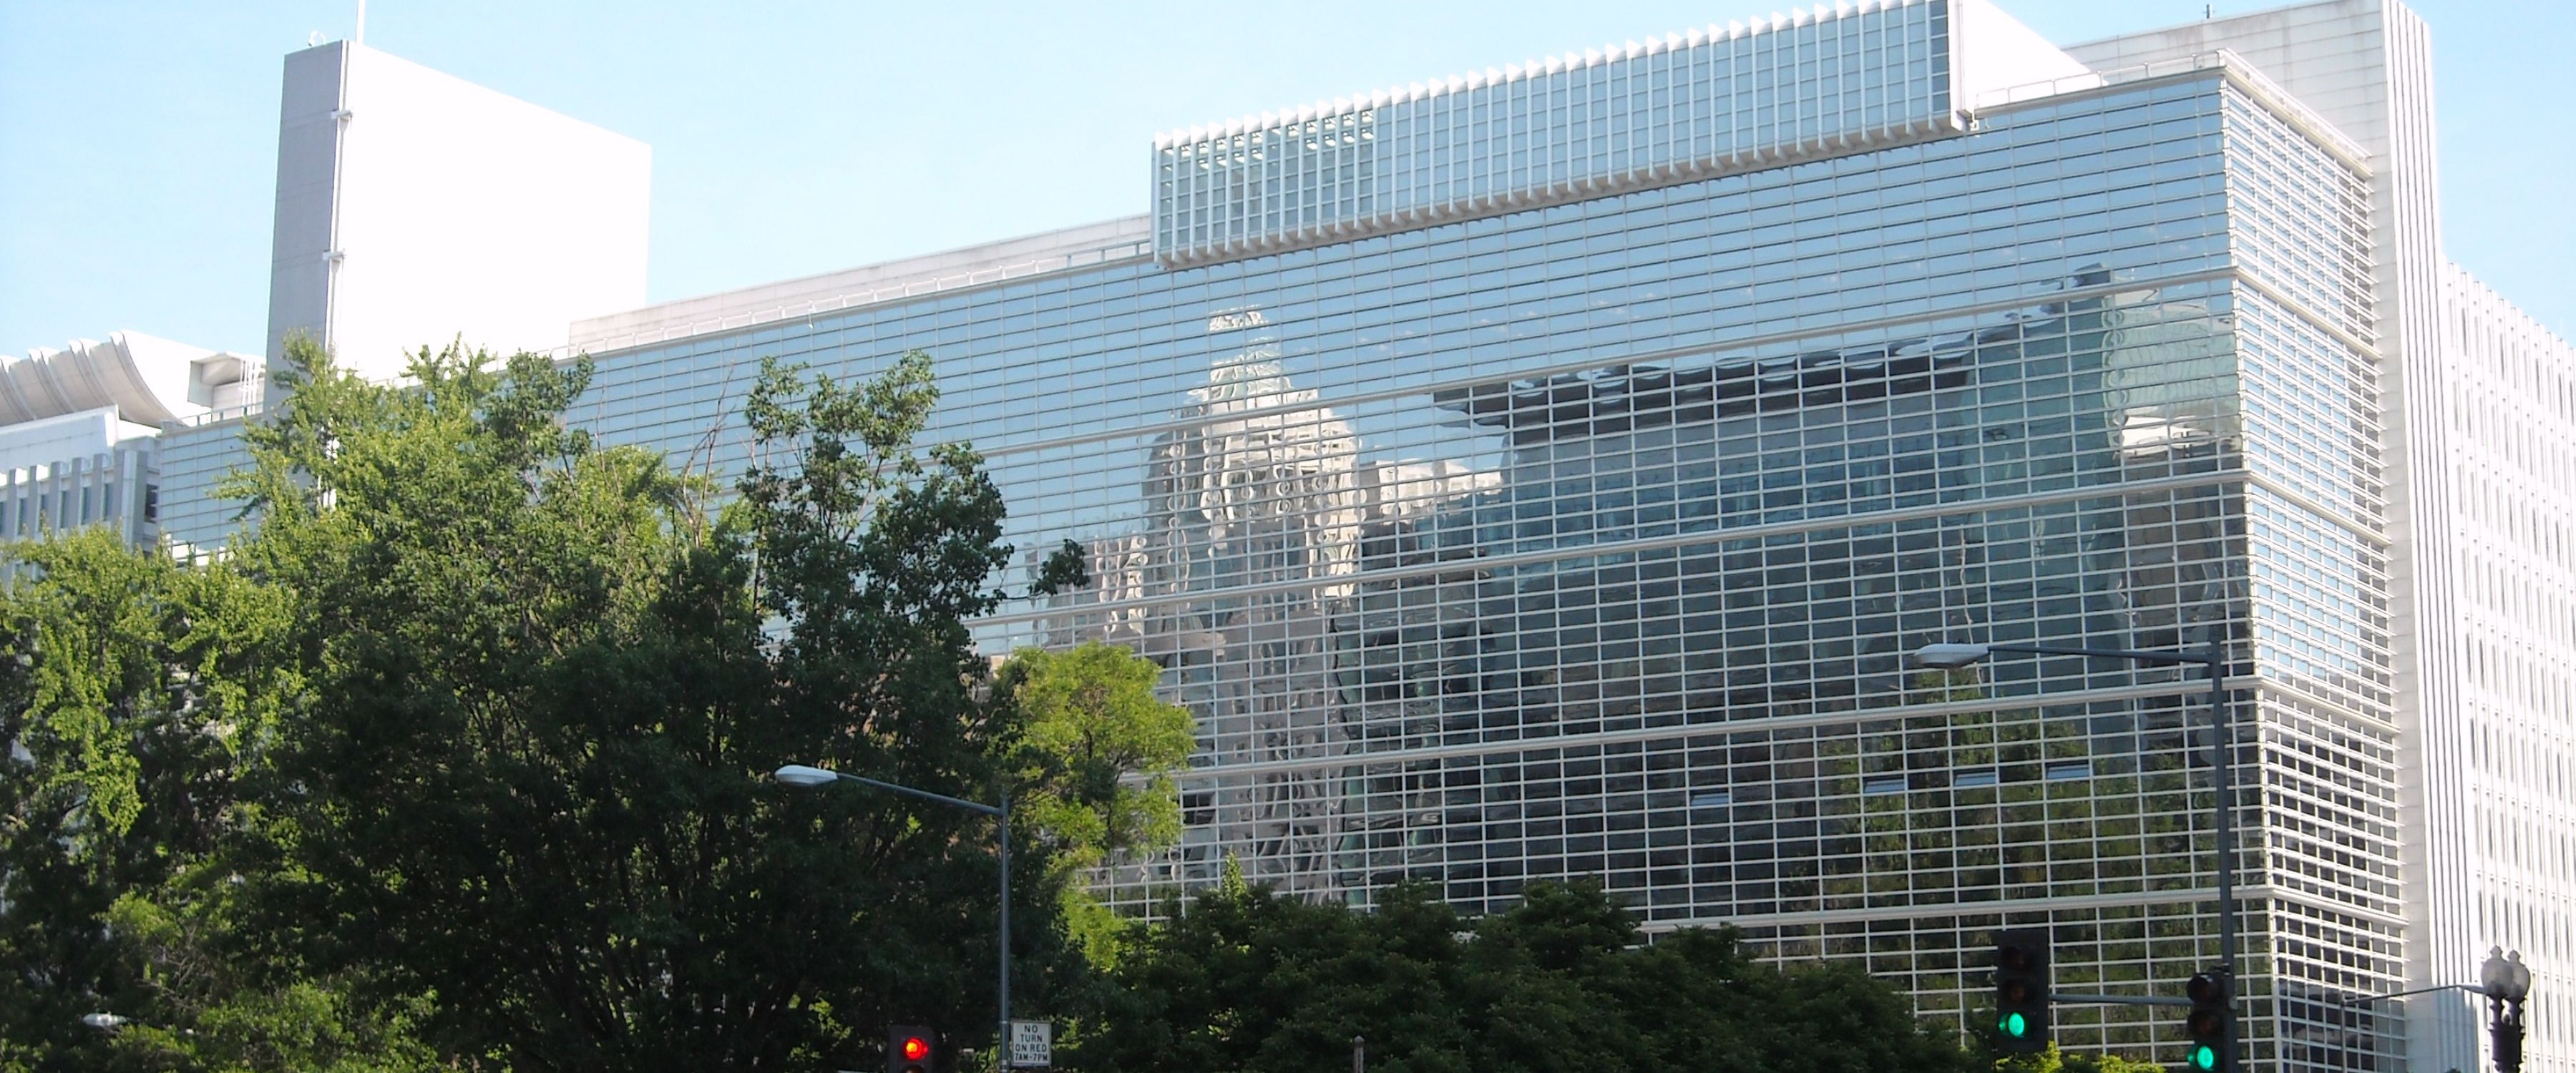 The World Bank Group headquarters buildings in Washington, D.C